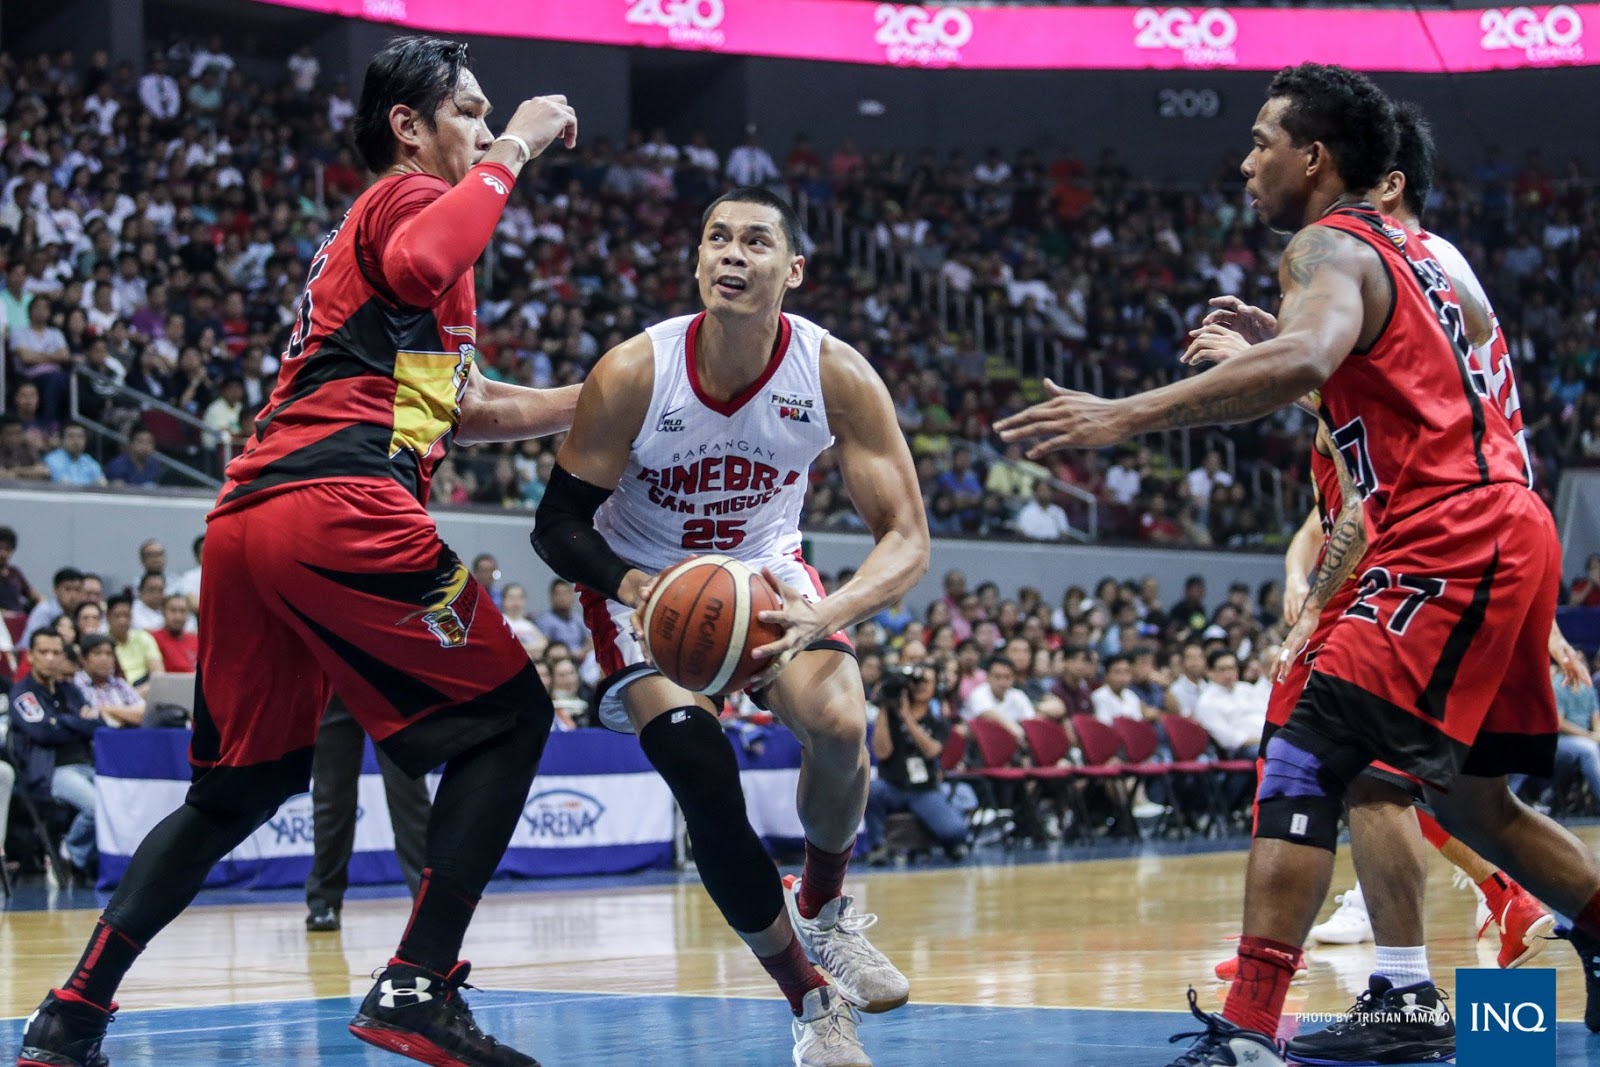 Ginebra reverses fate, levels series at 1-1 after crushing SMB